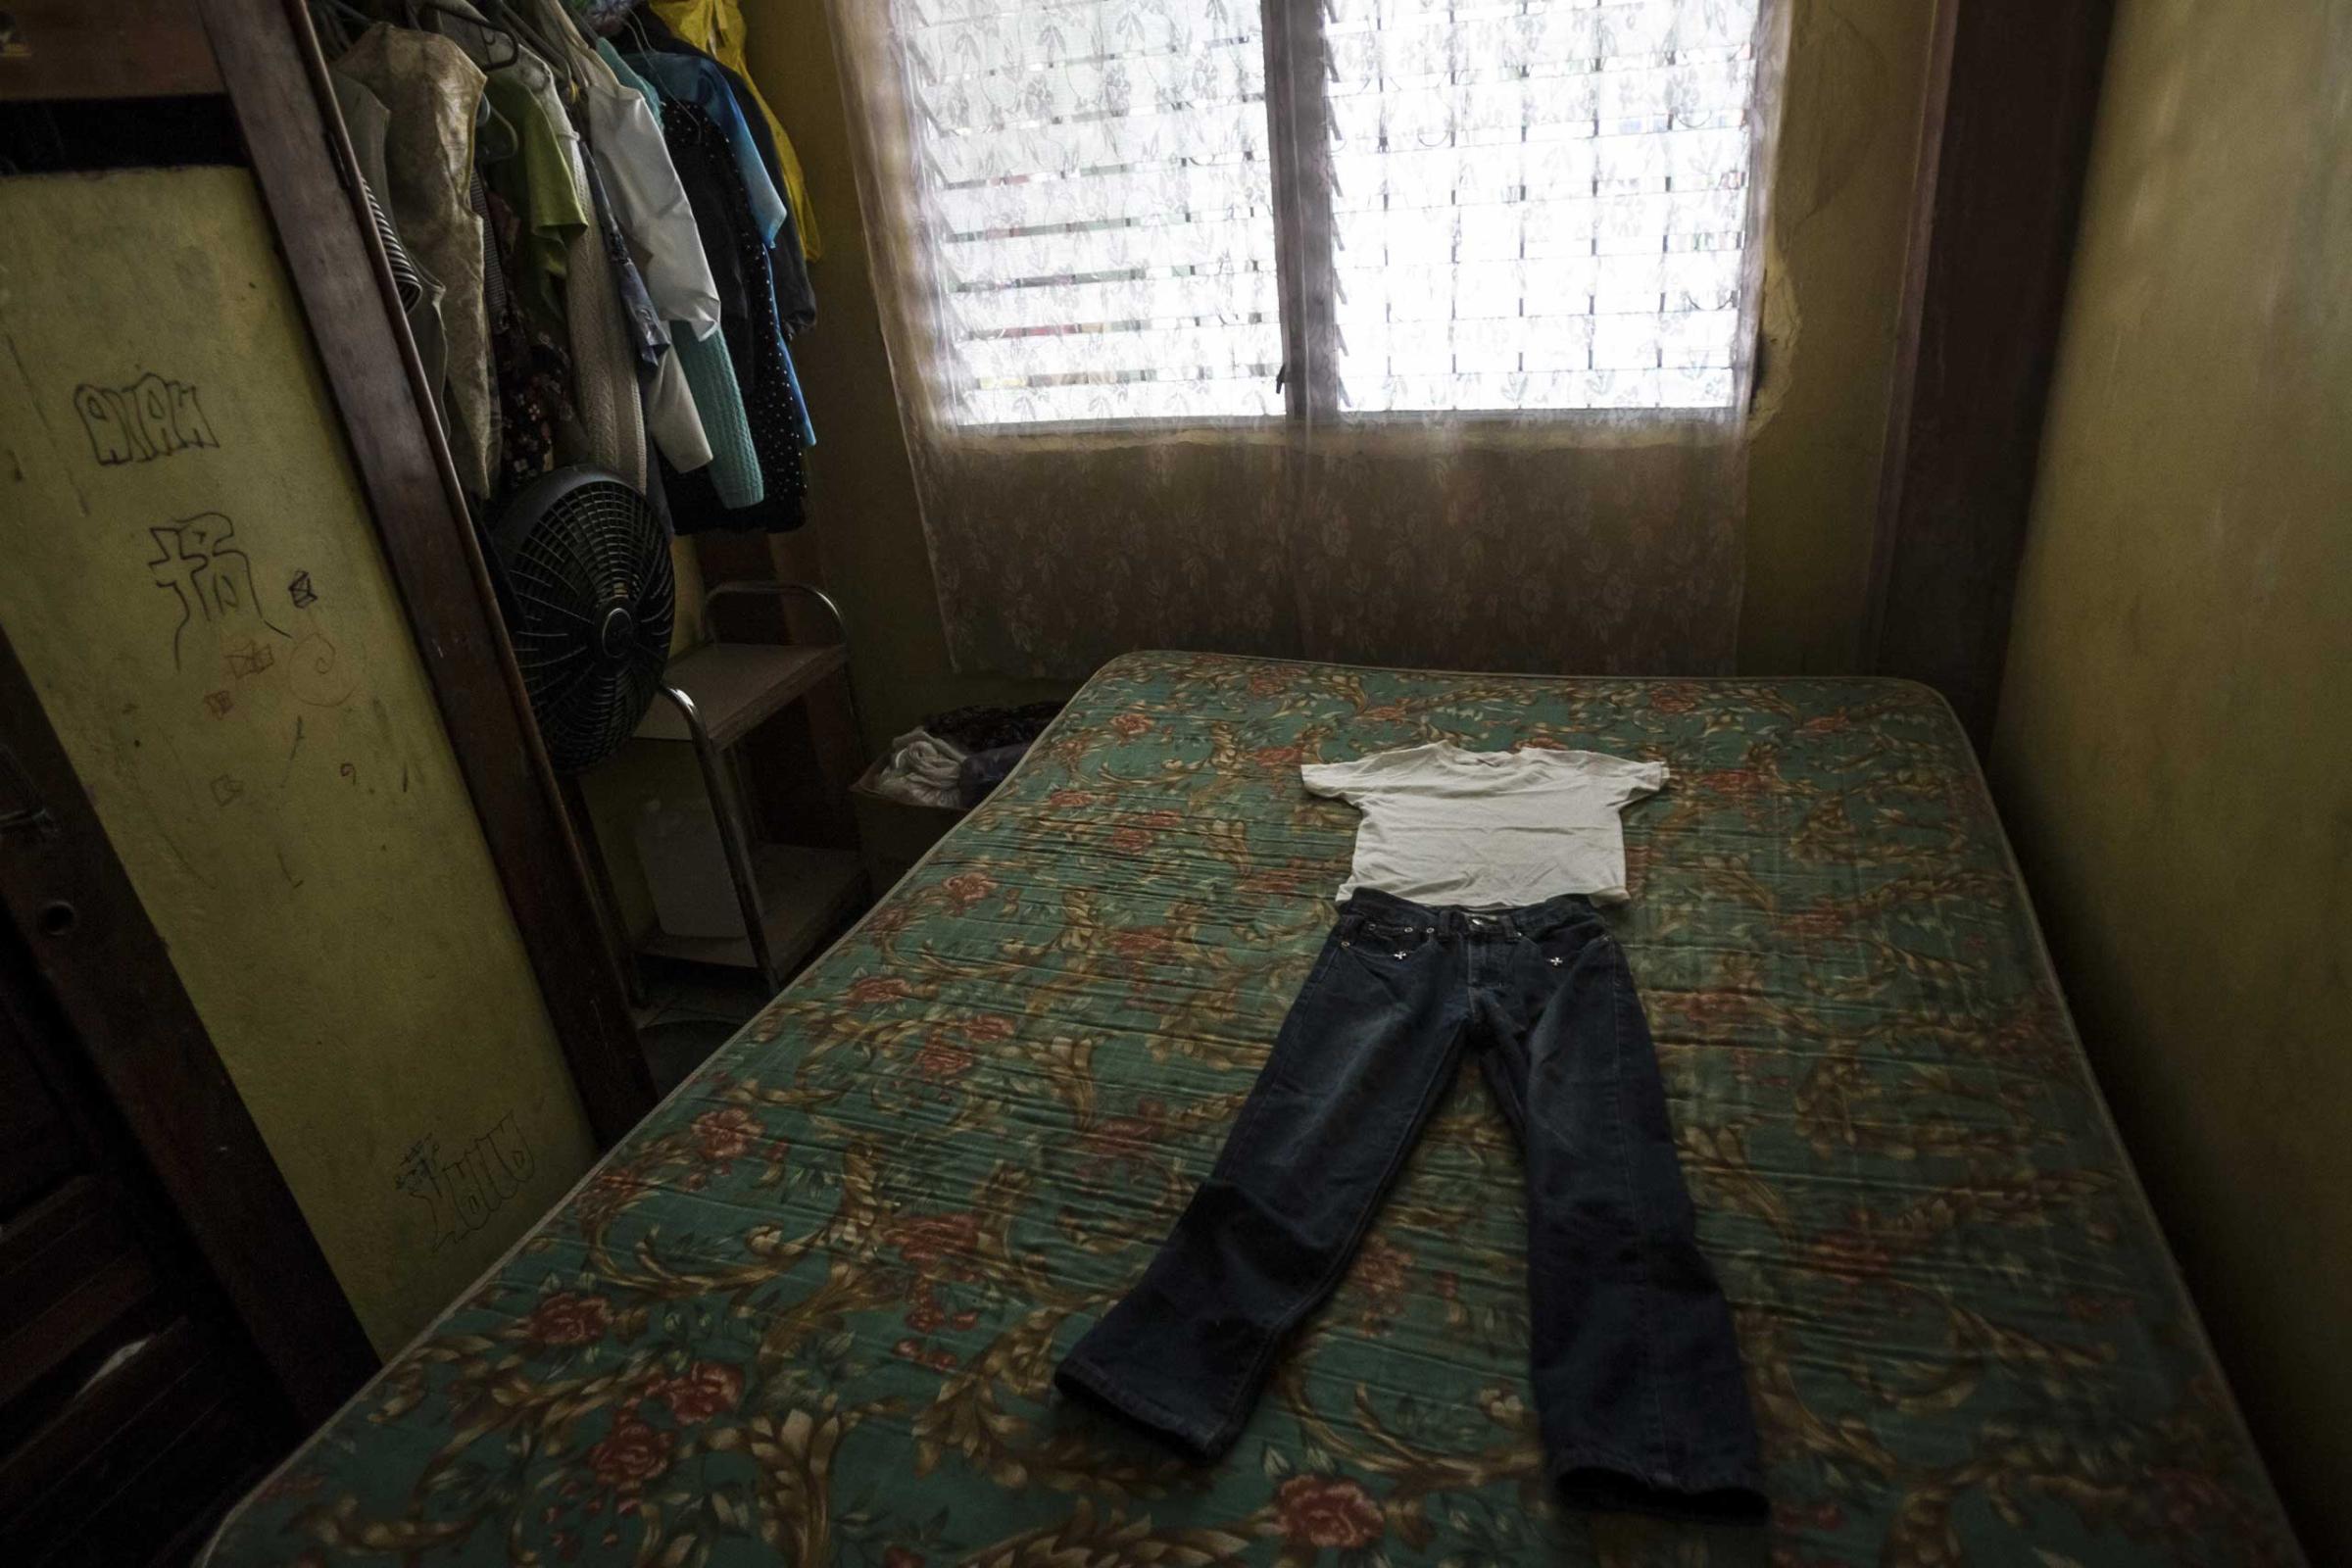 Clothes laid out on a bed for seven-year-old Kenneth Castellanos, whom police say was tortured to death by gang members in San Pedro Sula, Honduras, May 23, 2014.